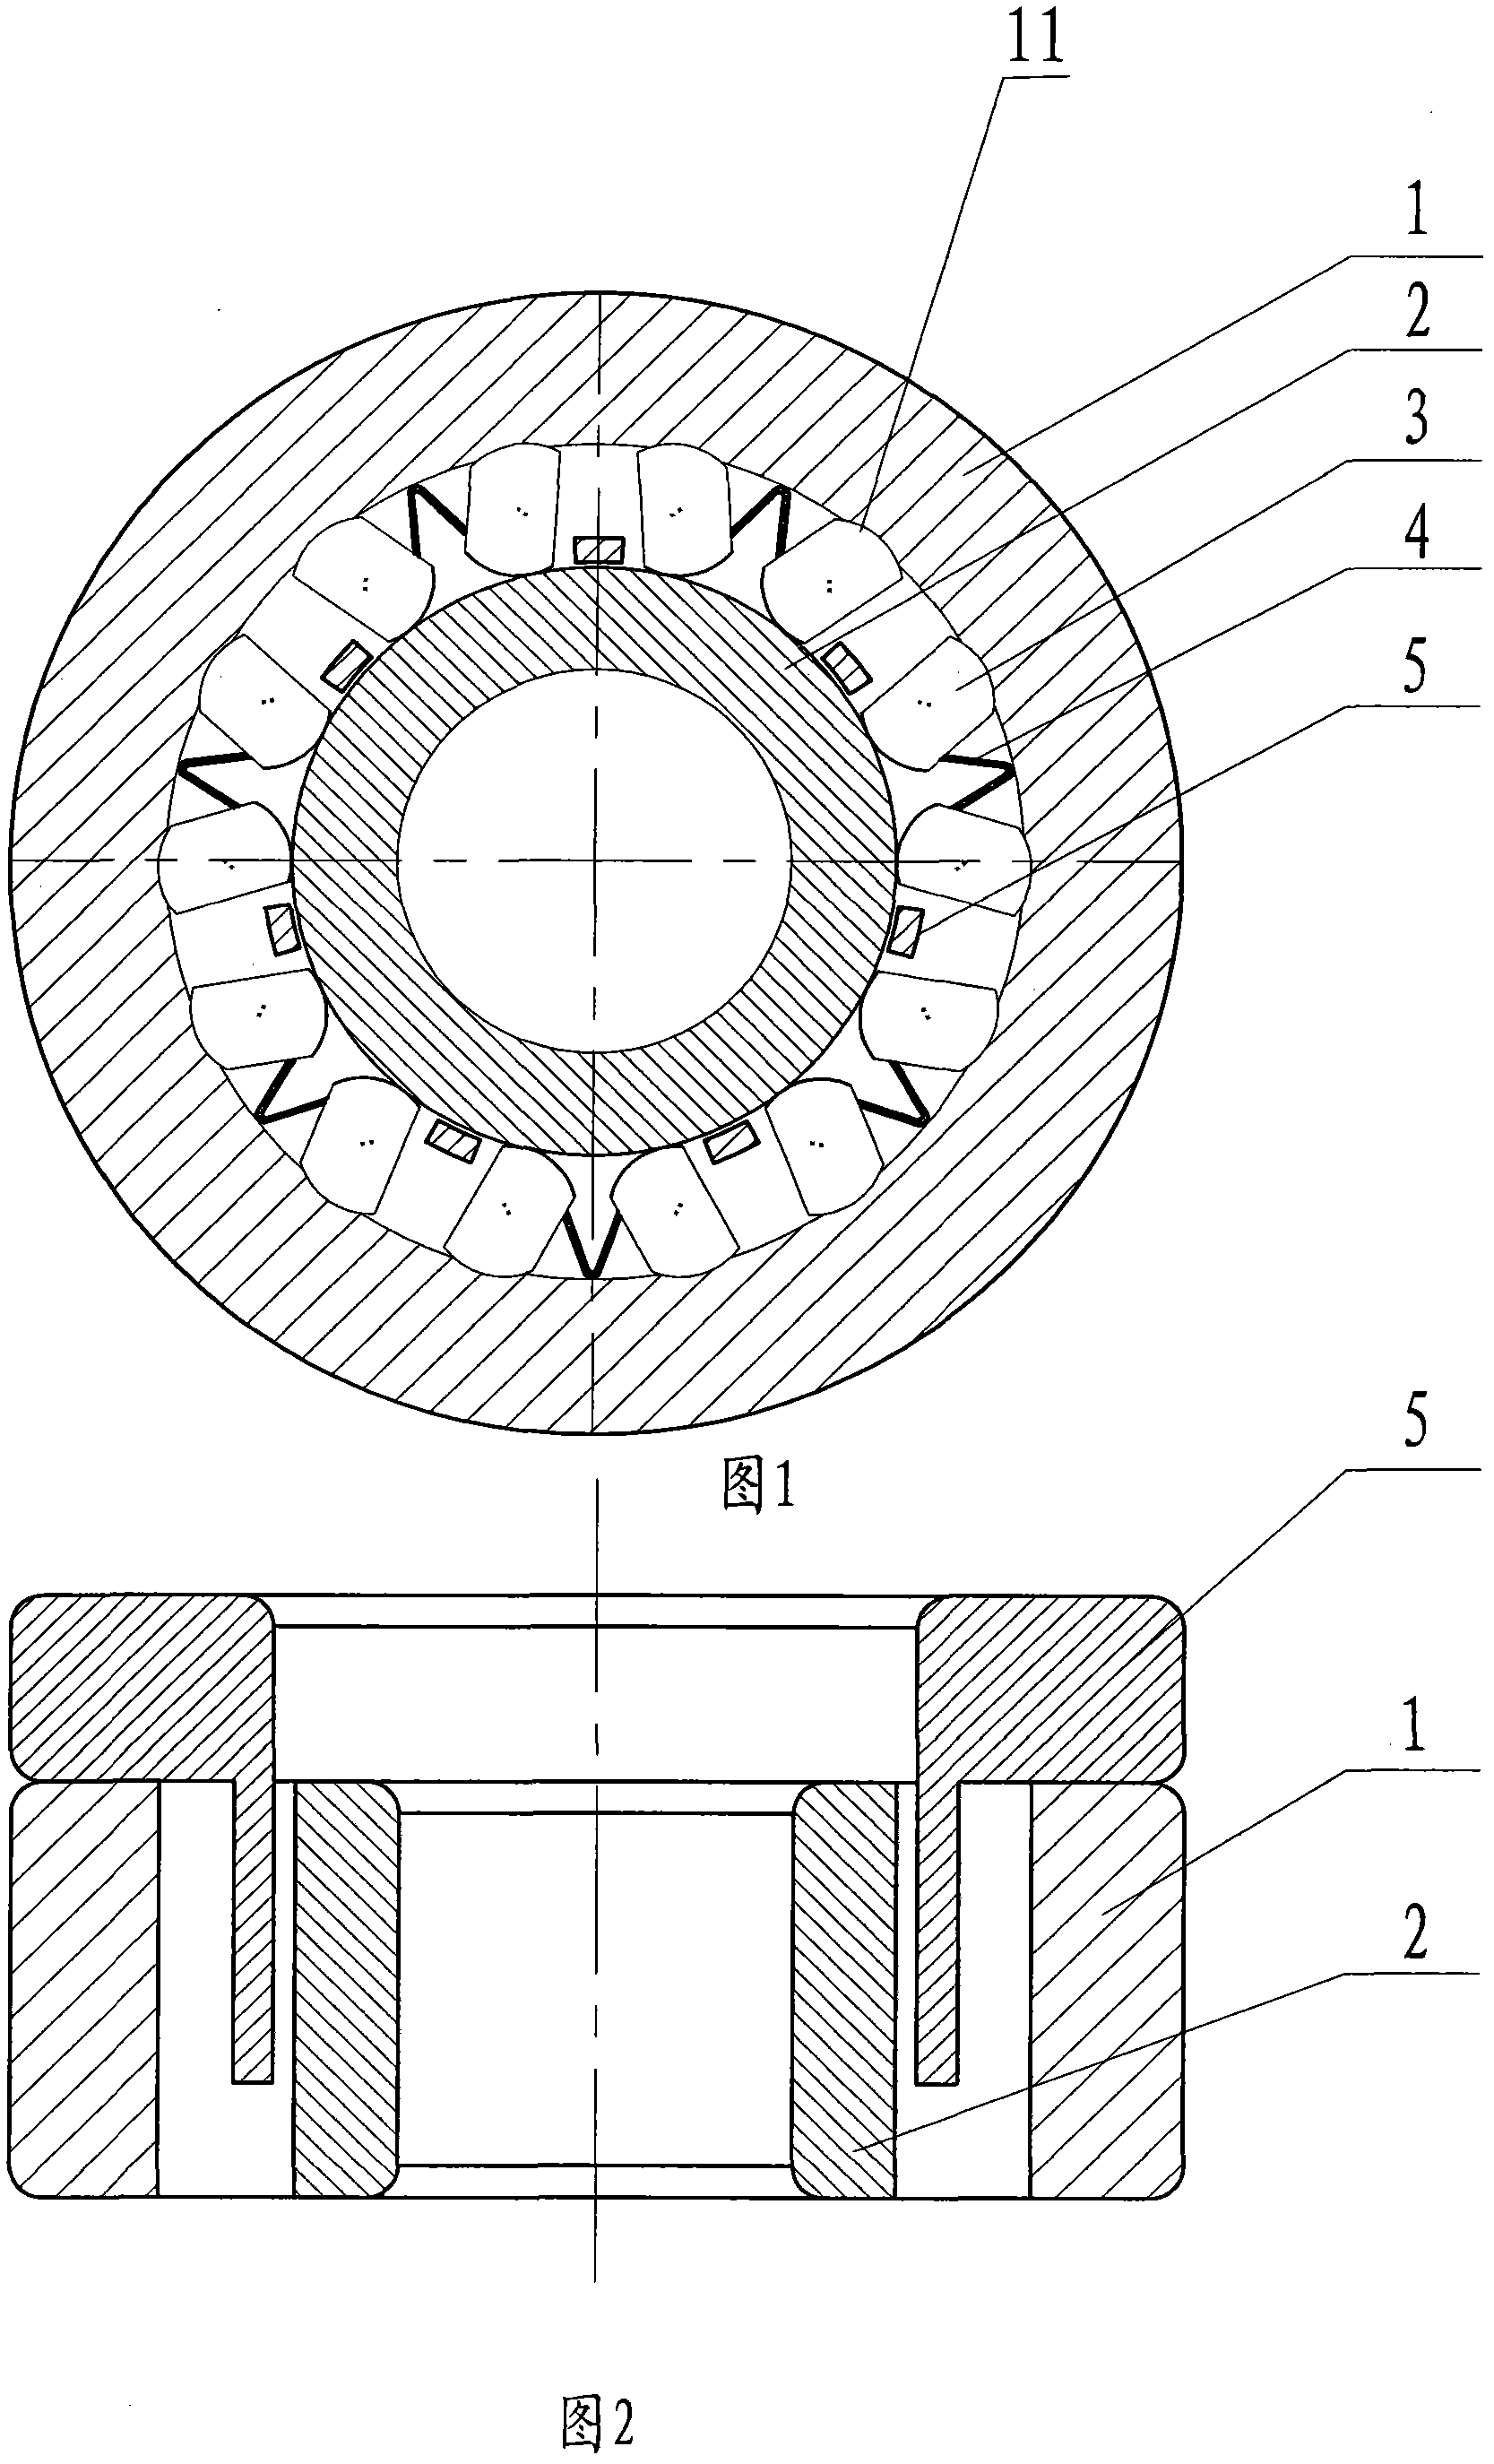 Reversible-wedge-type overrun clutch with outer ring provided with grooves